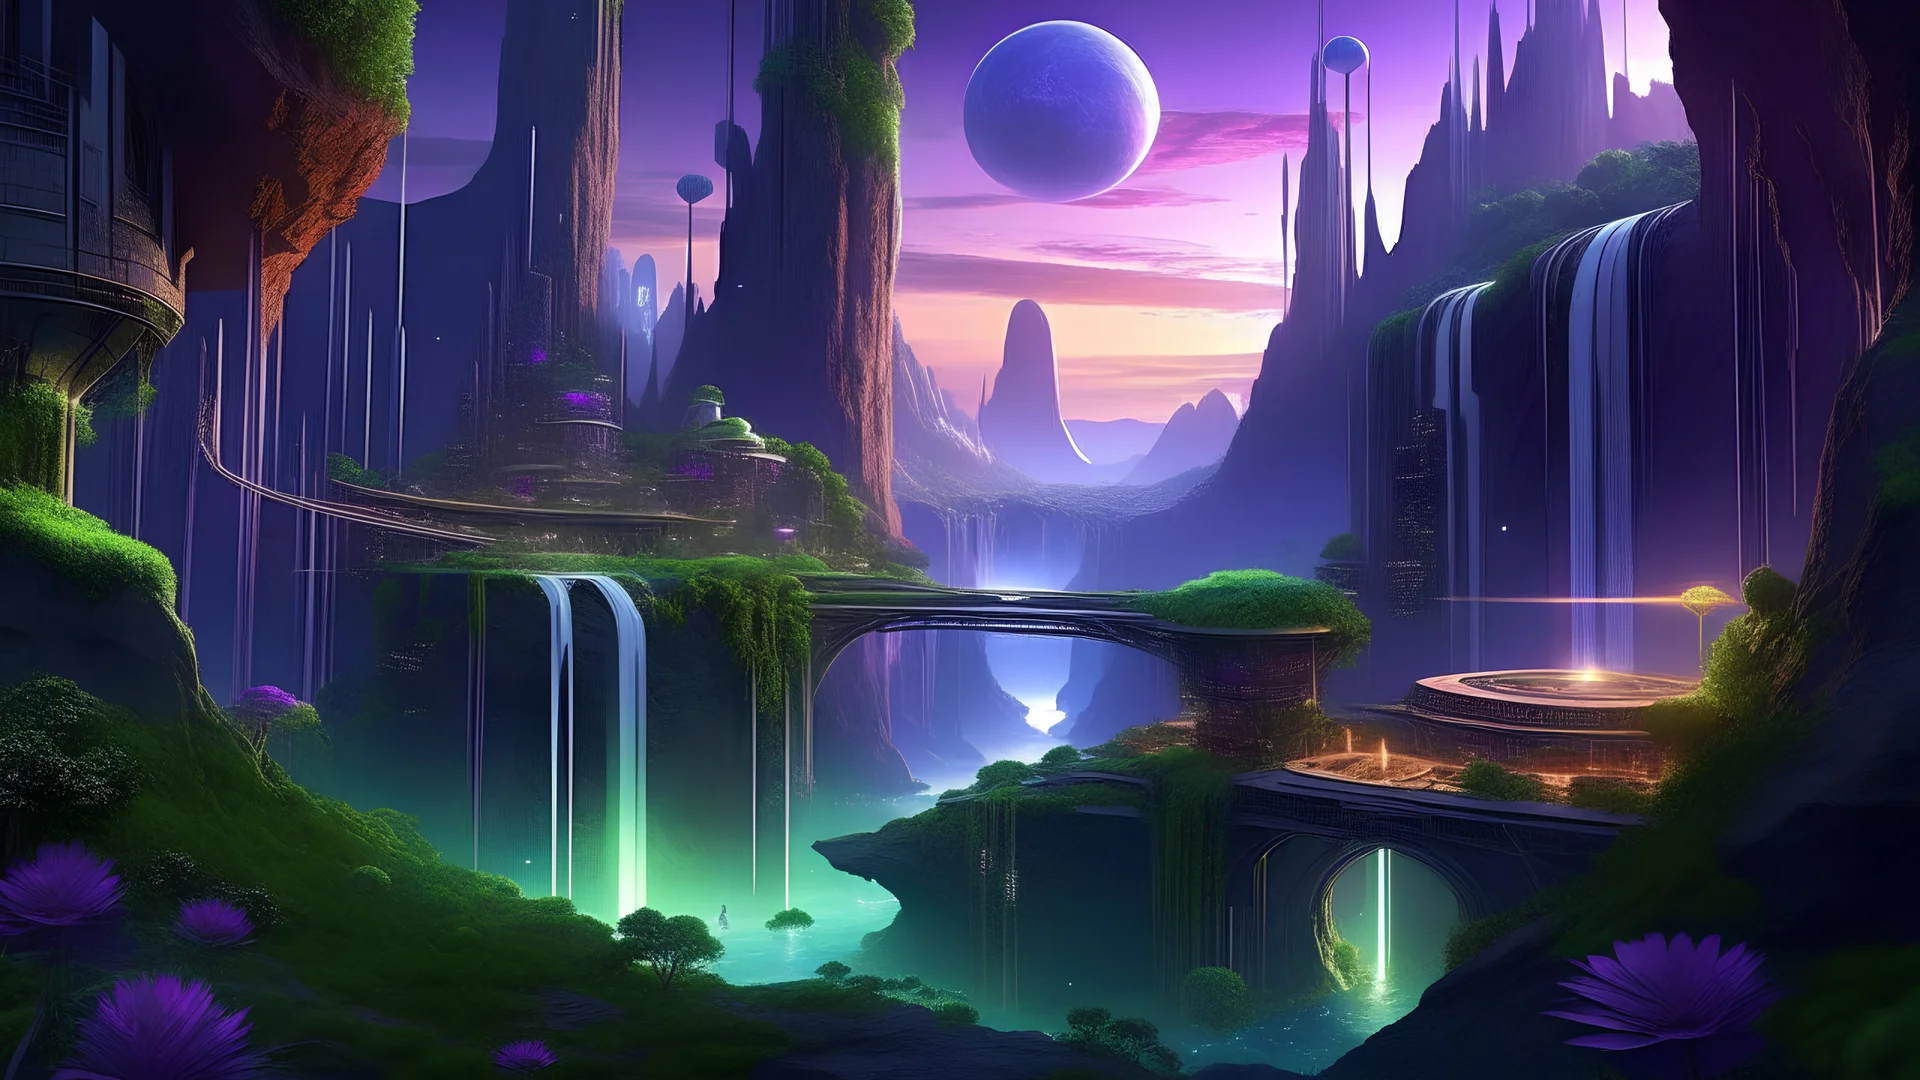 a futuristic city inside a lush and overgrown canyon. the scenery is alien with otherworldly plants and transparent, crystallike water flowing in streams and waterfall through the canyon on the horizon a purple sun is setting and in the sky above stars and a larger planet can be seen